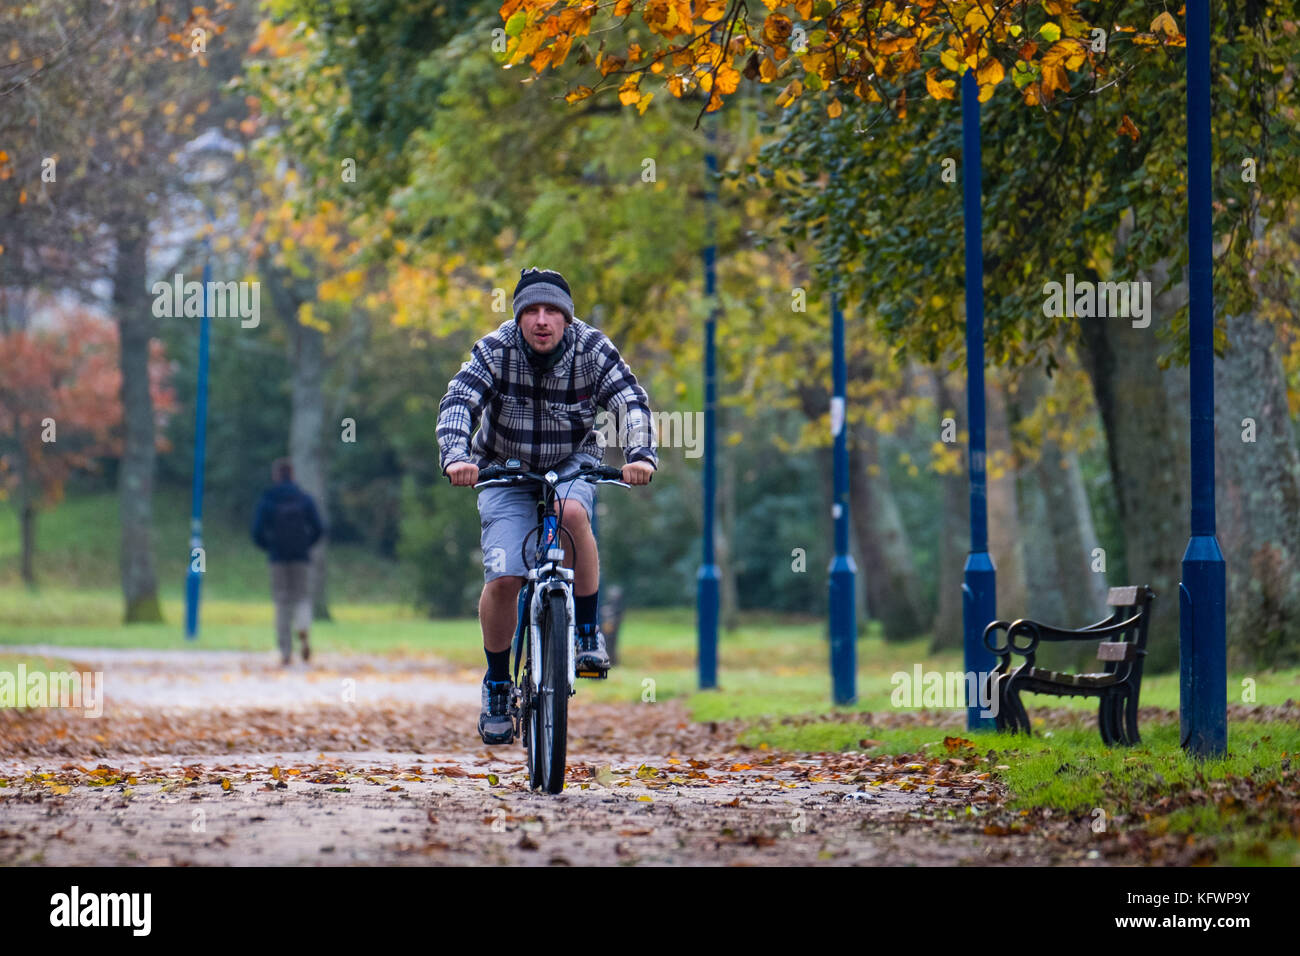 Aberystwyth Wales UK, Wednesday 1 November 2017 UK weather: A man cycling along Plascrug Avenue in Aberystwyth on the first day of November, with all the deciduous trees shedding their leaves in a myriad of rich autumnal colours photo Credit: Keith Morris/Alamy Live News Stock Photo